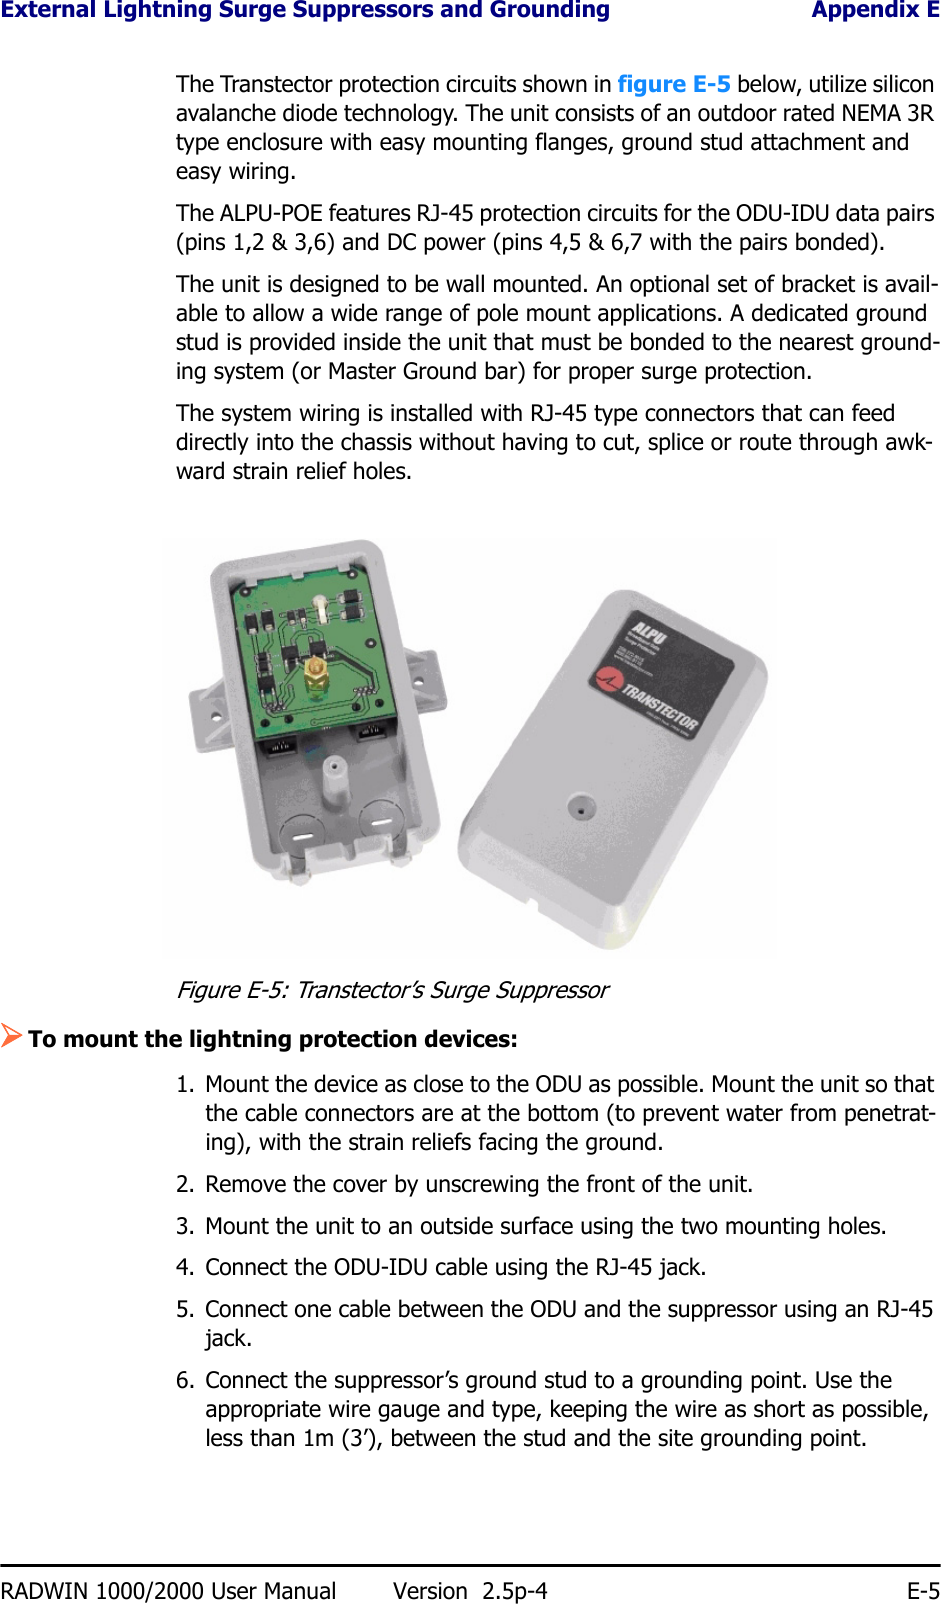 External Lightning Surge Suppressors and Grounding Appendix ERADWIN 1000/2000 User Manual Version  2.5p-4 E-5The Transtector protection circuits shown in figure E-5 below, utilize silicon avalanche diode technology. The unit consists of an outdoor rated NEMA 3R type enclosure with easy mounting flanges, ground stud attachment and easy wiring.The ALPU-POE features RJ-45 protection circuits for the ODU-IDU data pairs (pins 1,2 &amp; 3,6) and DC power (pins 4,5 &amp; 6,7 with the pairs bonded).The unit is designed to be wall mounted. An optional set of bracket is avail-able to allow a wide range of pole mount applications. A dedicated ground stud is provided inside the unit that must be bonded to the nearest ground-ing system (or Master Ground bar) for proper surge protection.The system wiring is installed with RJ-45 type connectors that can feed directly into the chassis without having to cut, splice or route through awk-ward strain relief holes.Figure E-5: Transtector’s Surge Suppressor¾To mount the lightning protection devices:1. Mount the device as close to the ODU as possible. Mount the unit so that the cable connectors are at the bottom (to prevent water from penetrat-ing), with the strain reliefs facing the ground.2. Remove the cover by unscrewing the front of the unit.3. Mount the unit to an outside surface using the two mounting holes.4. Connect the ODU-IDU cable using the RJ-45 jack.5. Connect one cable between the ODU and the suppressor using an RJ-45 jack.6. Connect the suppressor’s ground stud to a grounding point. Use the appropriate wire gauge and type, keeping the wire as short as possible, less than 1m (3’), between the stud and the site grounding point.